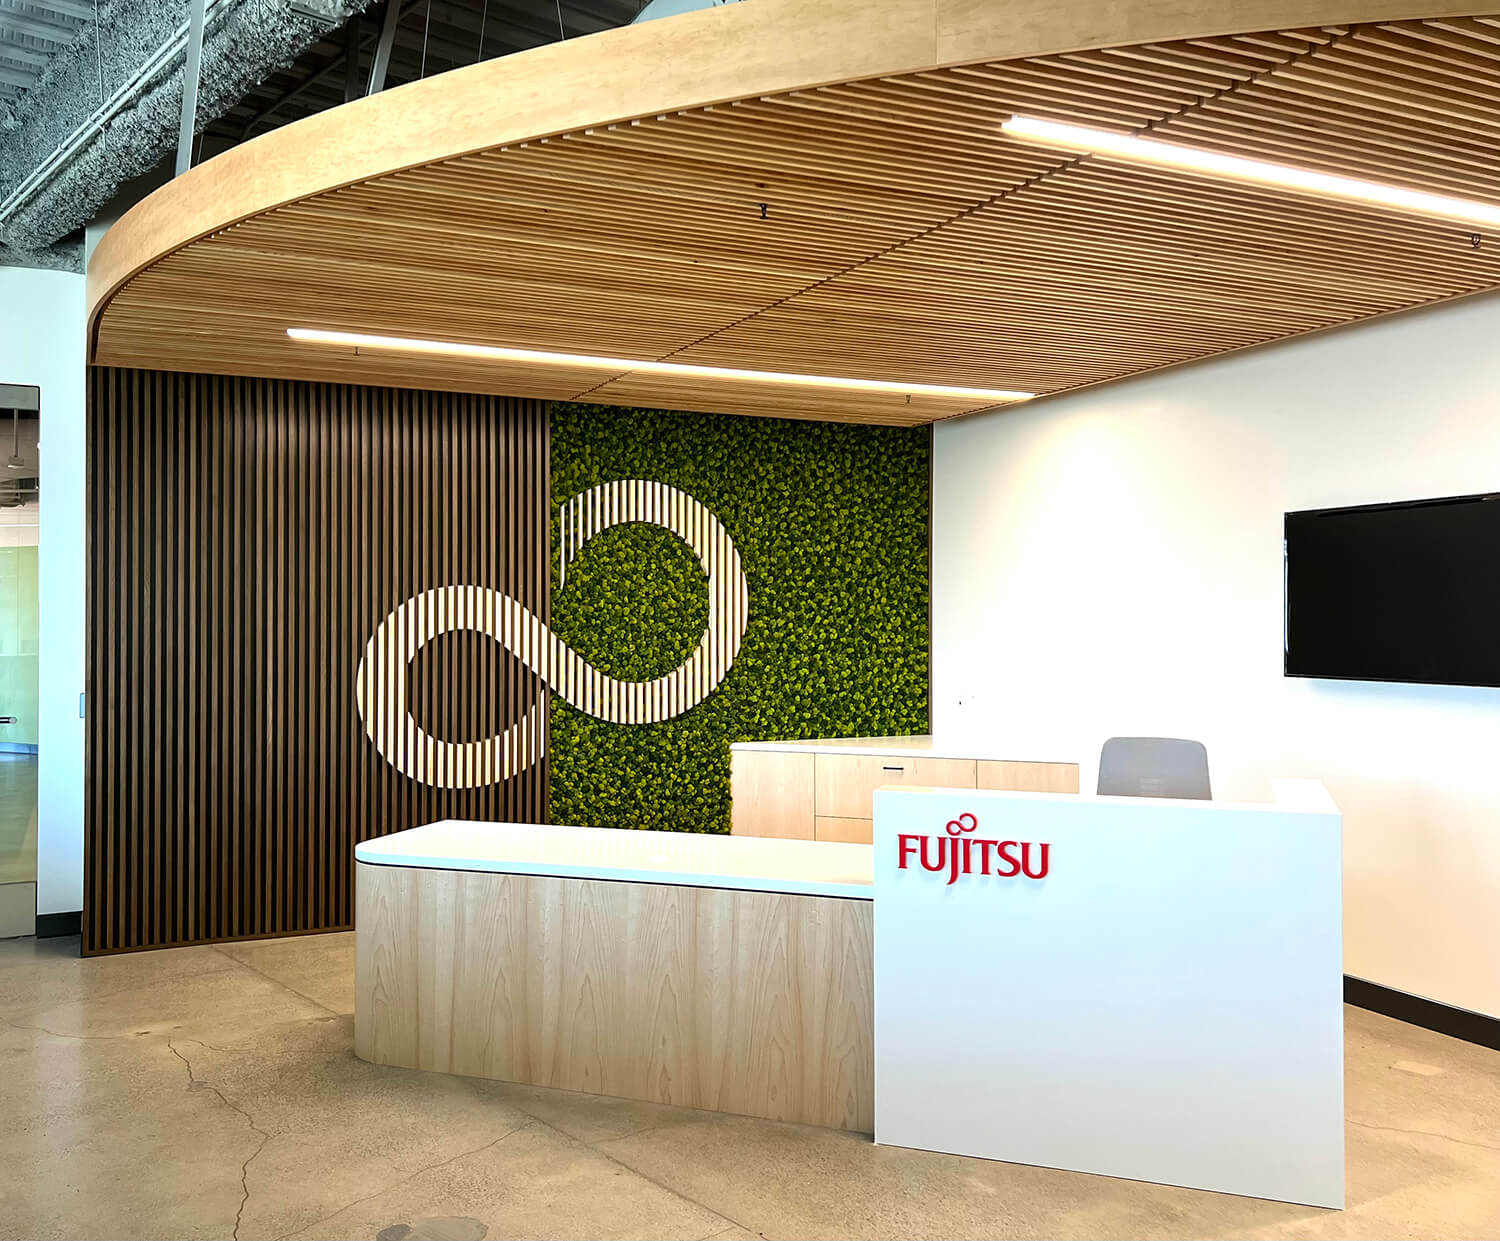 Enhance your brand identity with a captivating moss signage wall crafted by Urban Garden Studio. Elevate your corporate logo using sustainable reindeer moss, creating an eco-friendly and visually striking installation.